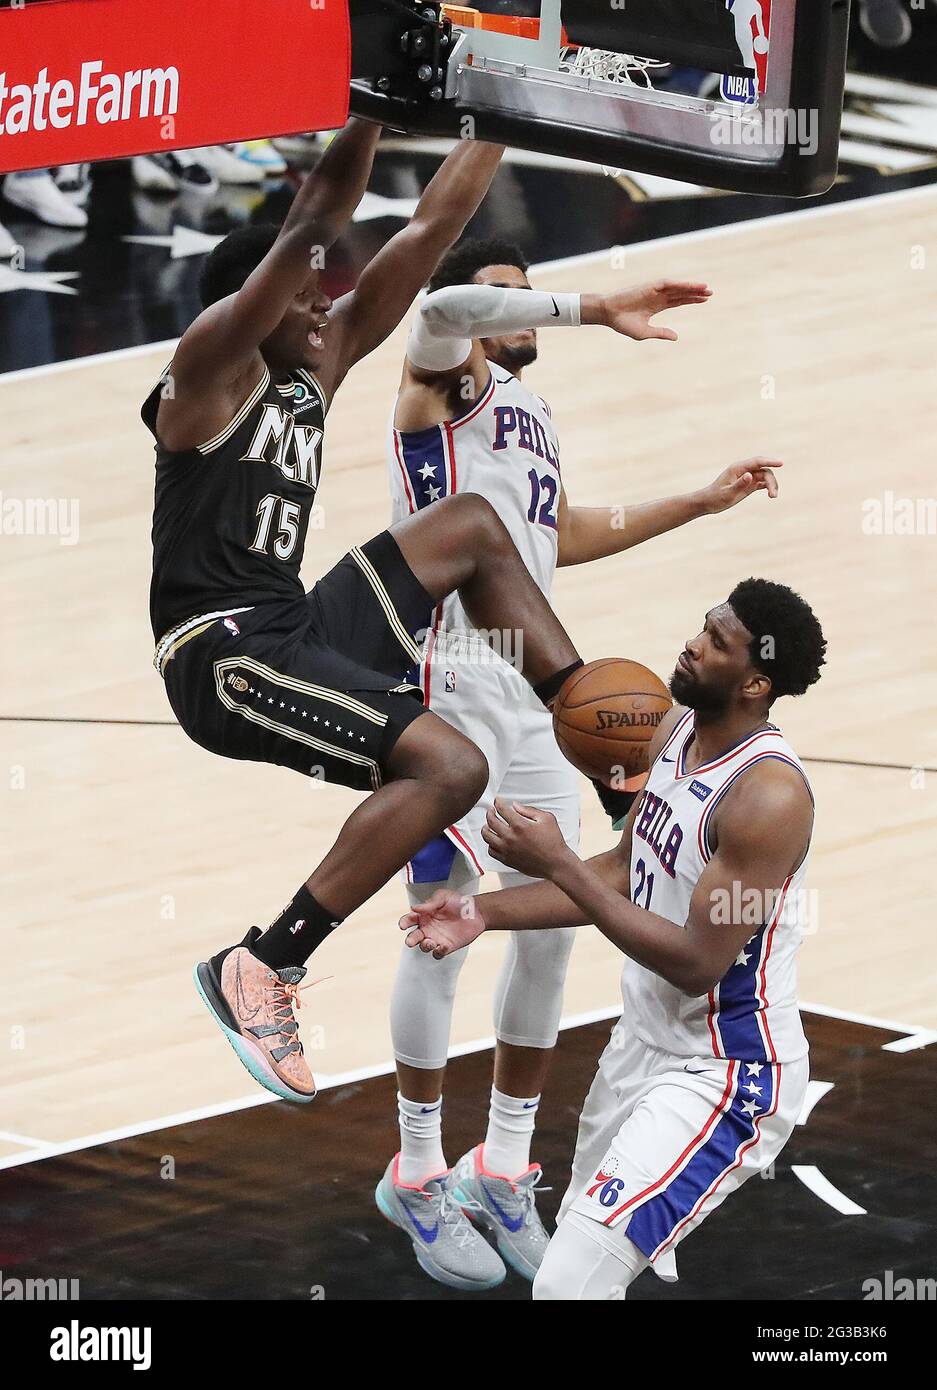 Atlanta, USA. 14th June, 2021. Atlanta Hawks center Clint Capela slams for two over Philadelphia 76ers defenders Joel Embiid (right) and Tobias Harris on a lob pass from Trae Young to take a 94-92 lead during the fourth quarter in game 4 of their NBA Eastern Conference semifinals series on Monday, June 14, 2021, in Atlanta. (Photo by Curtis Compton/Atlanta Journal-Constitution/TNS/Sipa USA) Credit: Sipa USA/Alamy Live News Stock Photo